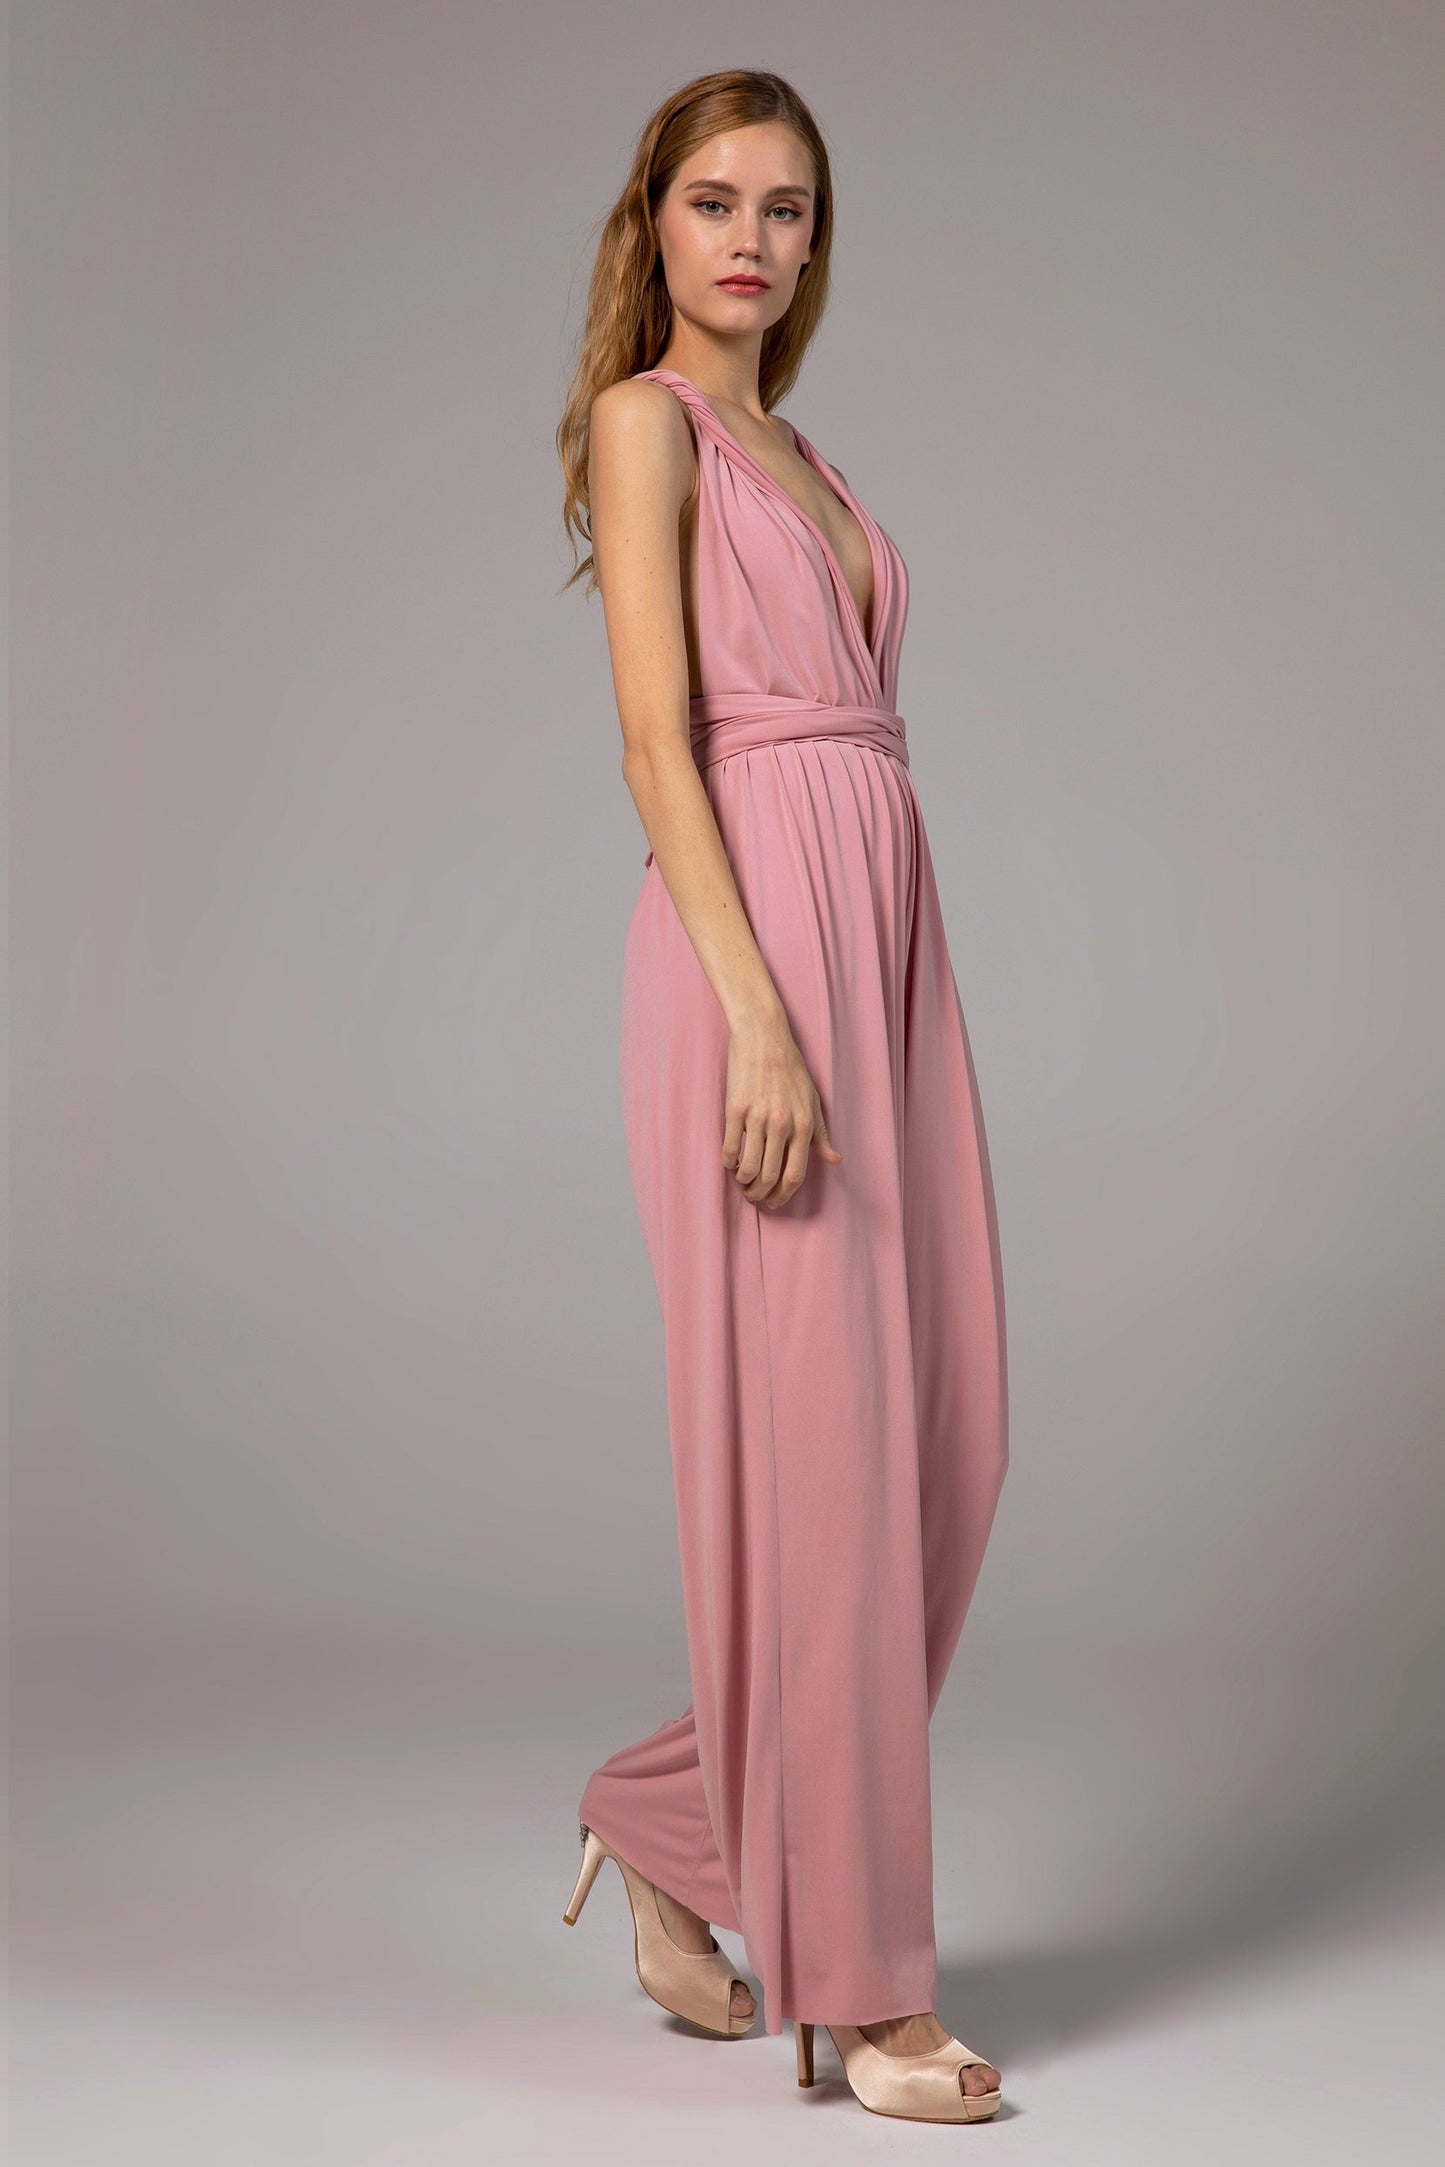 Jumpsuit Floor Length Knitted Fabric Bridesmaid Dress Formal Dresses CB0419